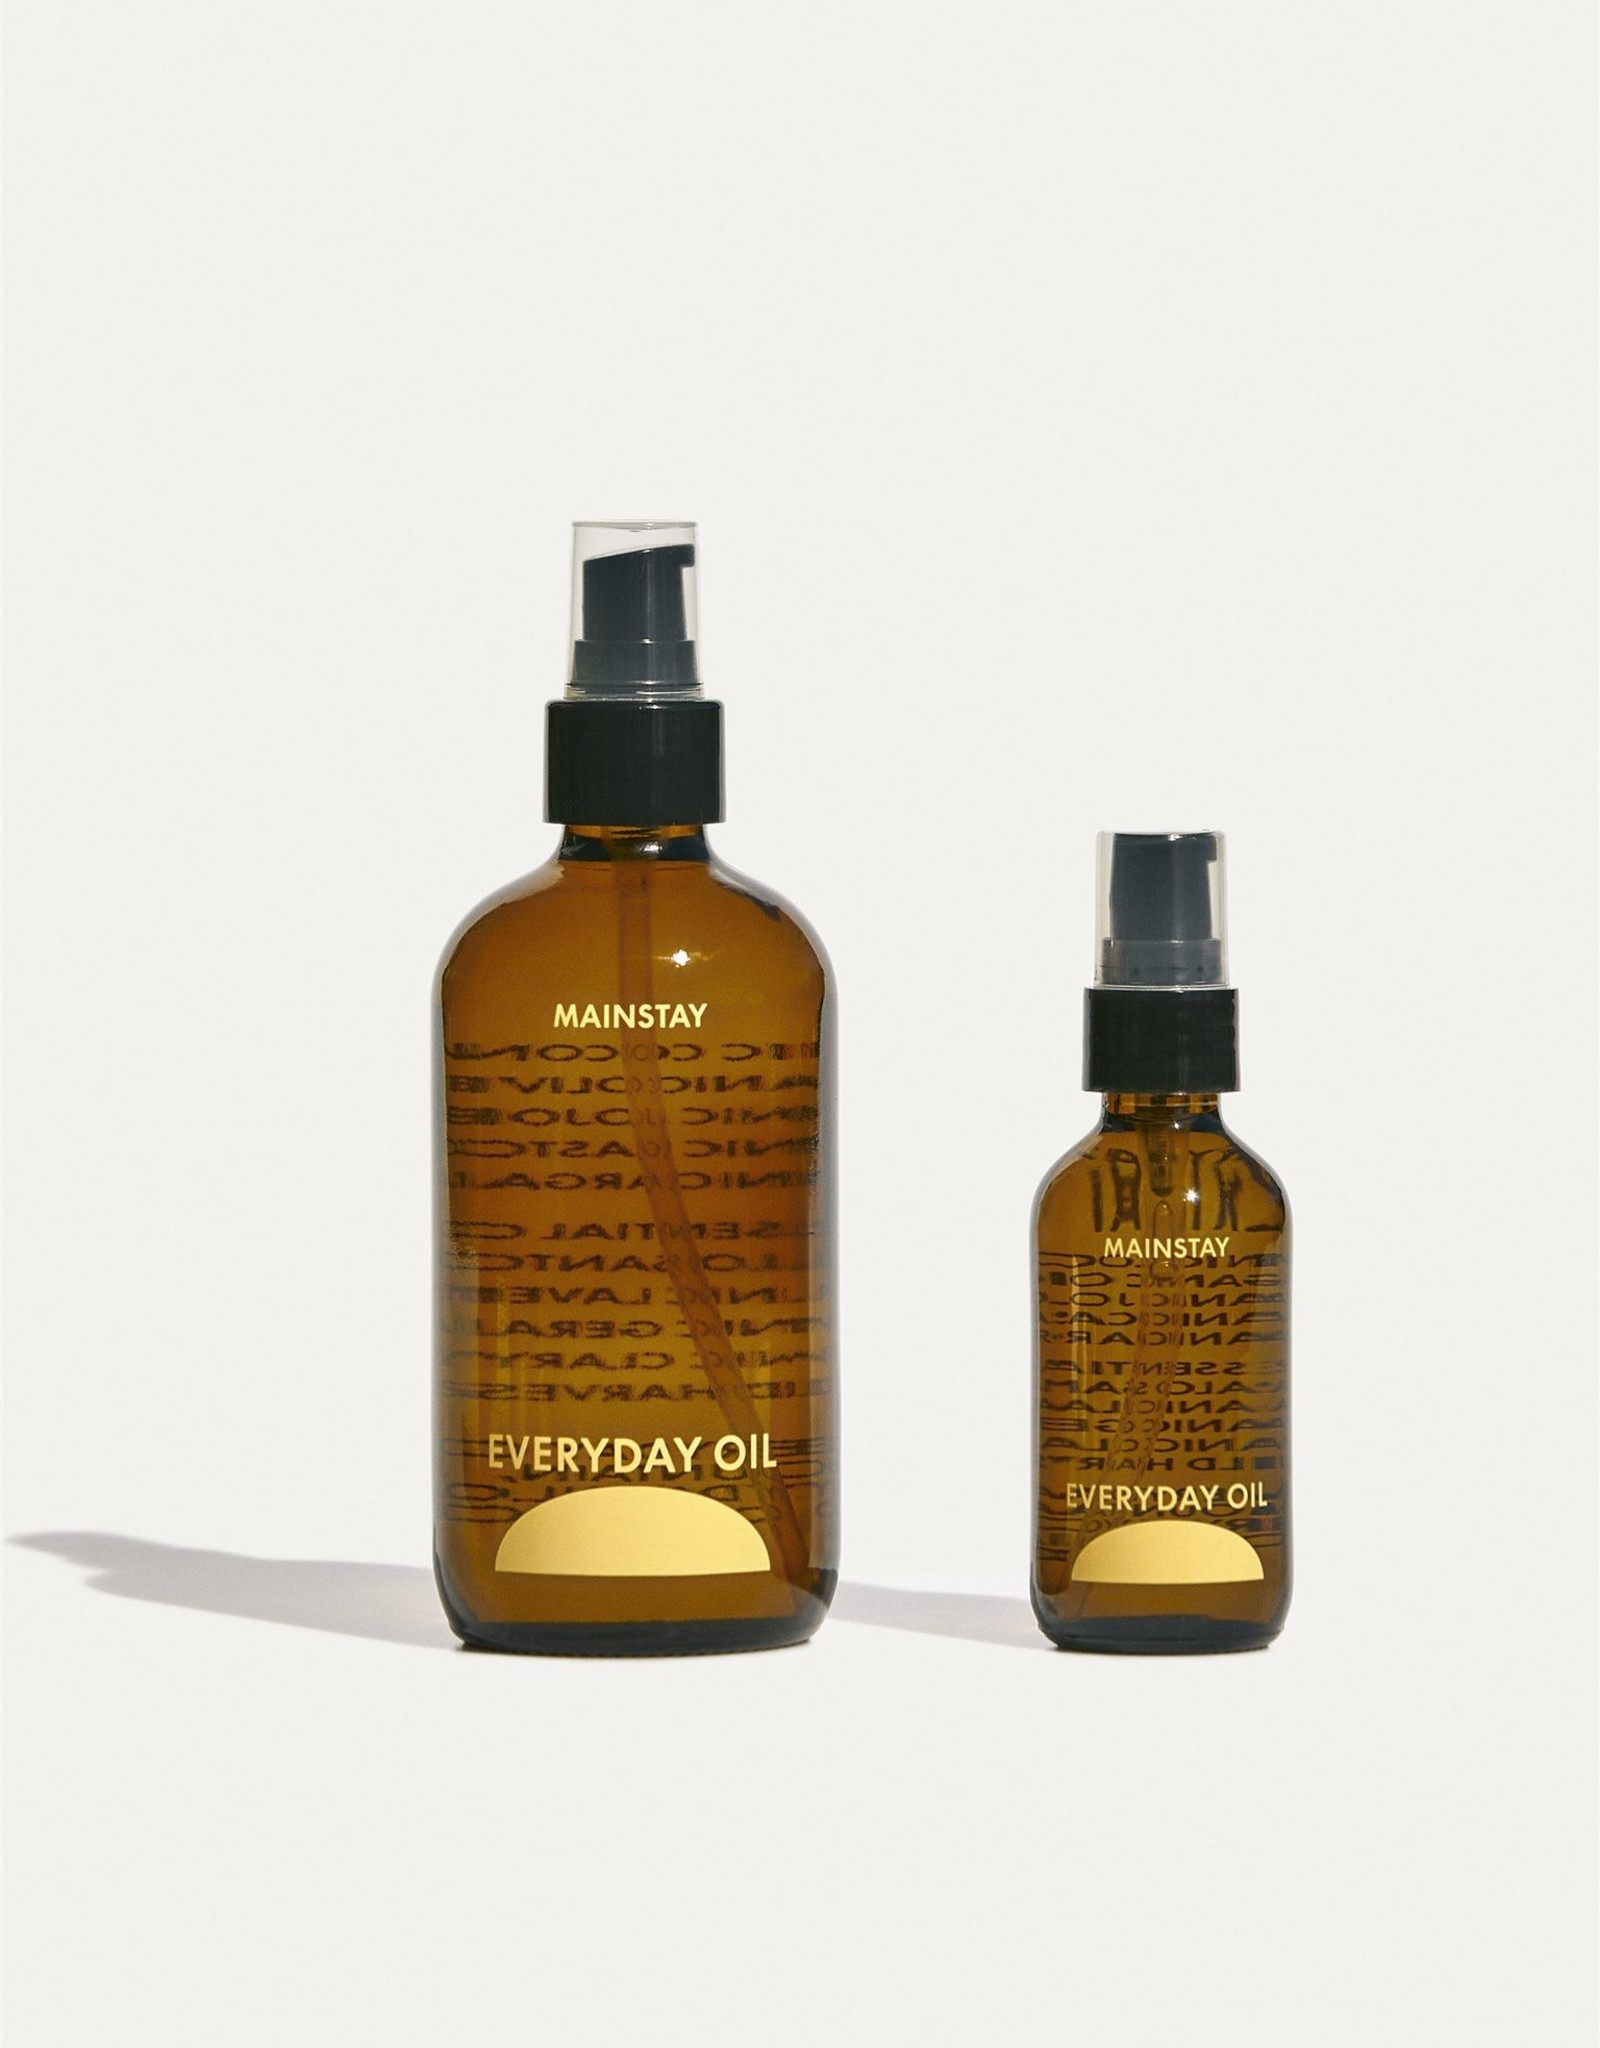 Everyday Oil Everyday Oil - Mainstay